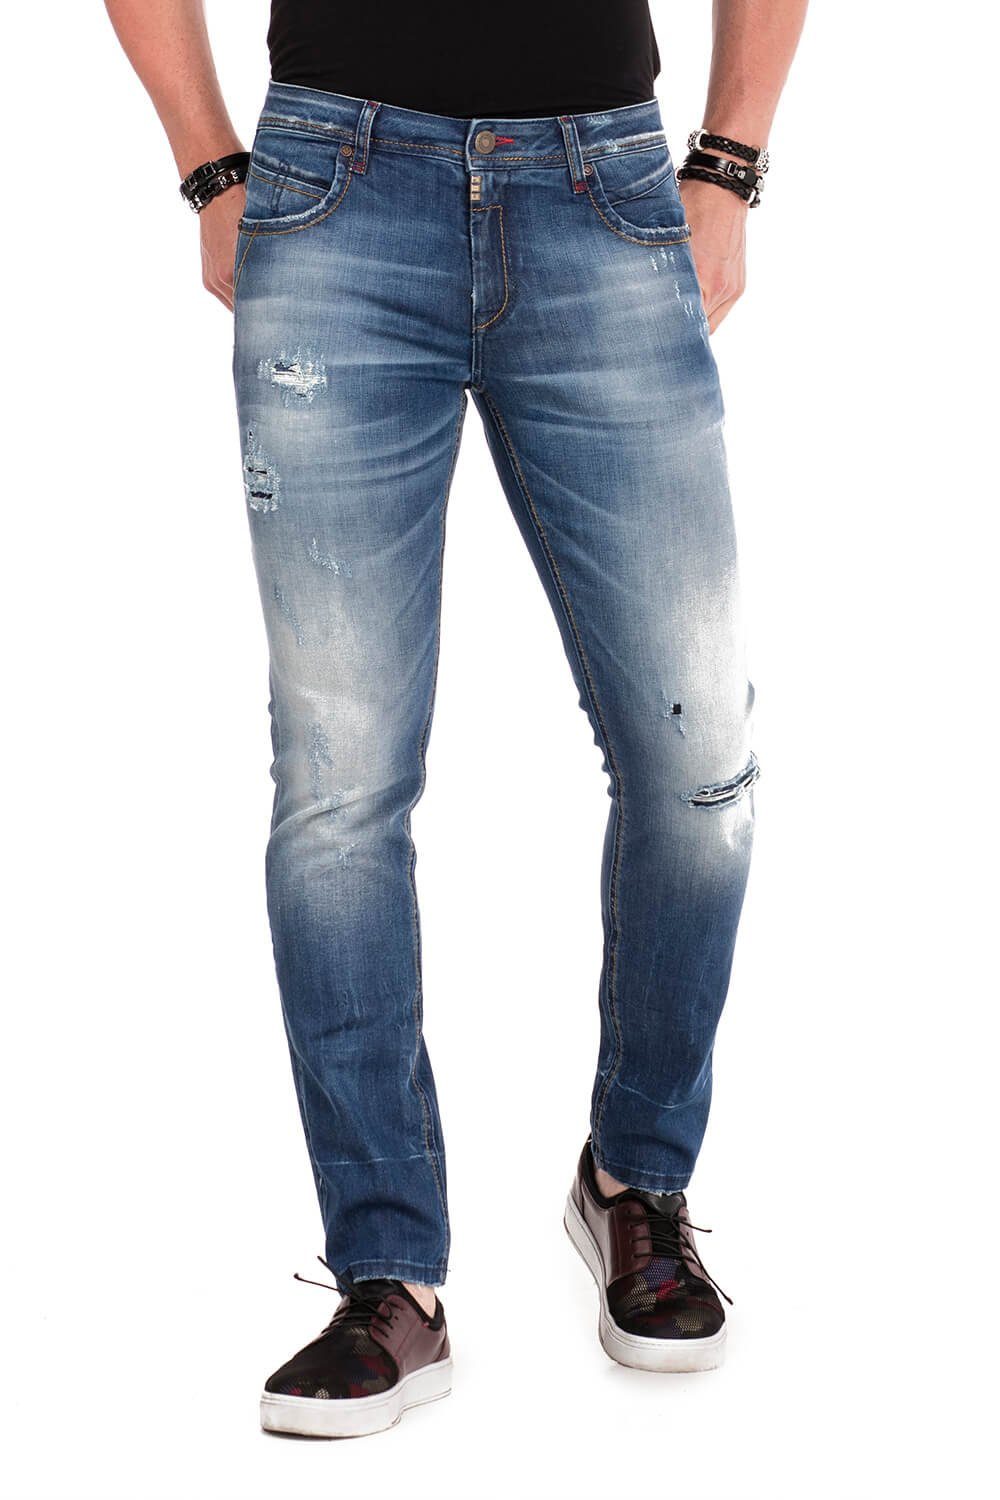 n im Straight Cipo Baxx Fit & Destroyed-Look Bequeme Jeans